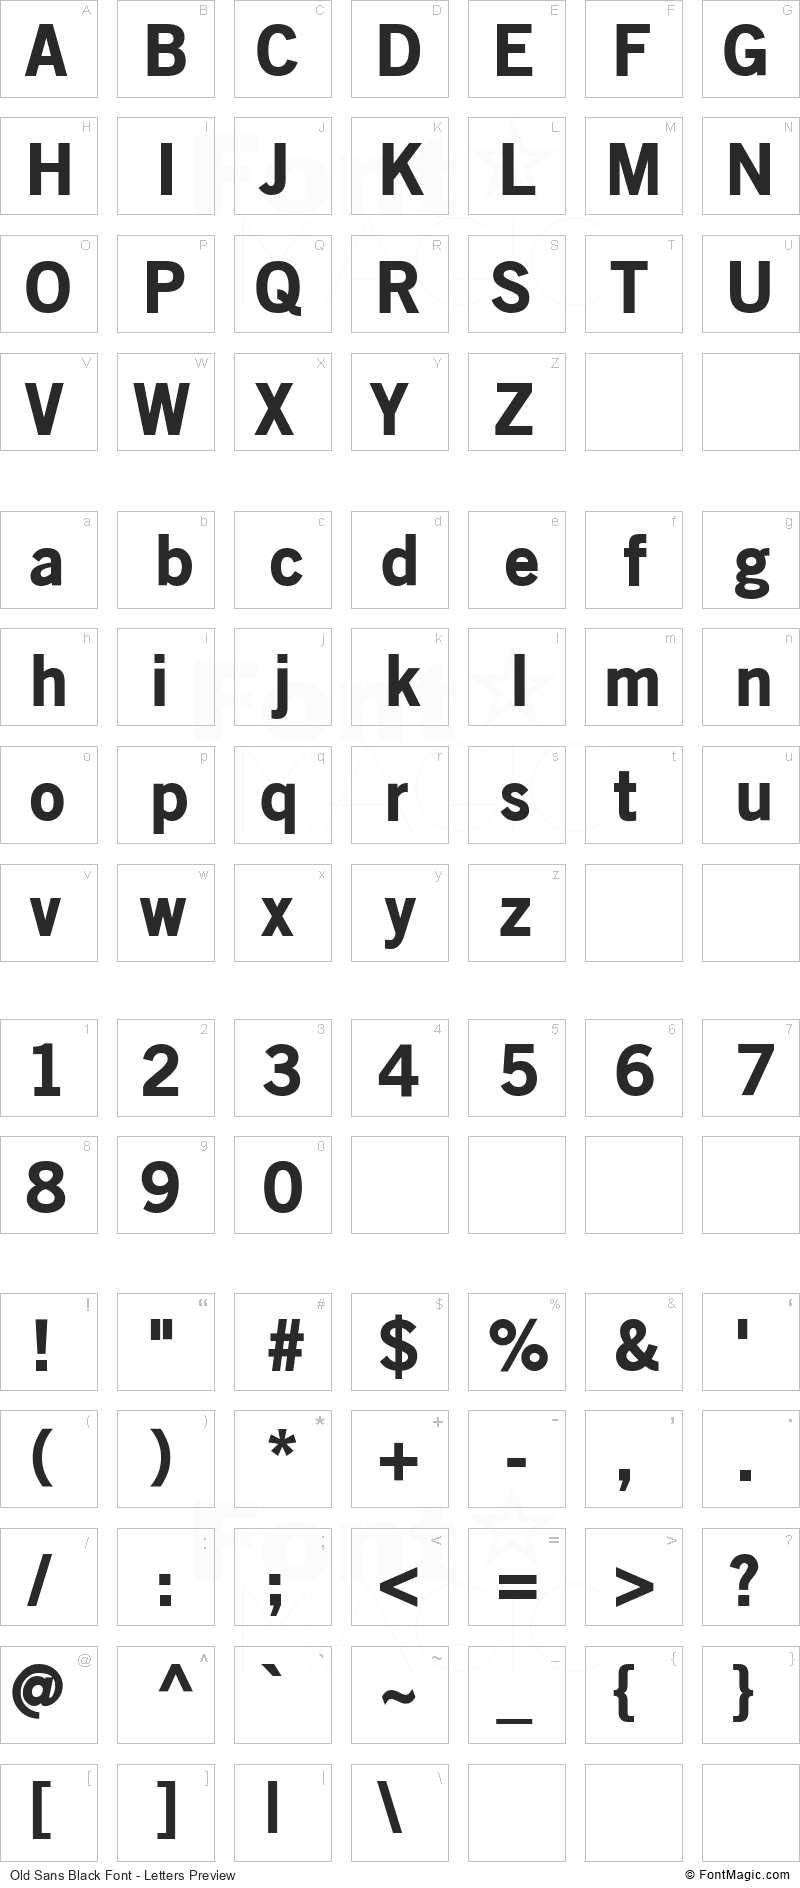 Old Sans Black Font - All Latters Preview Chart